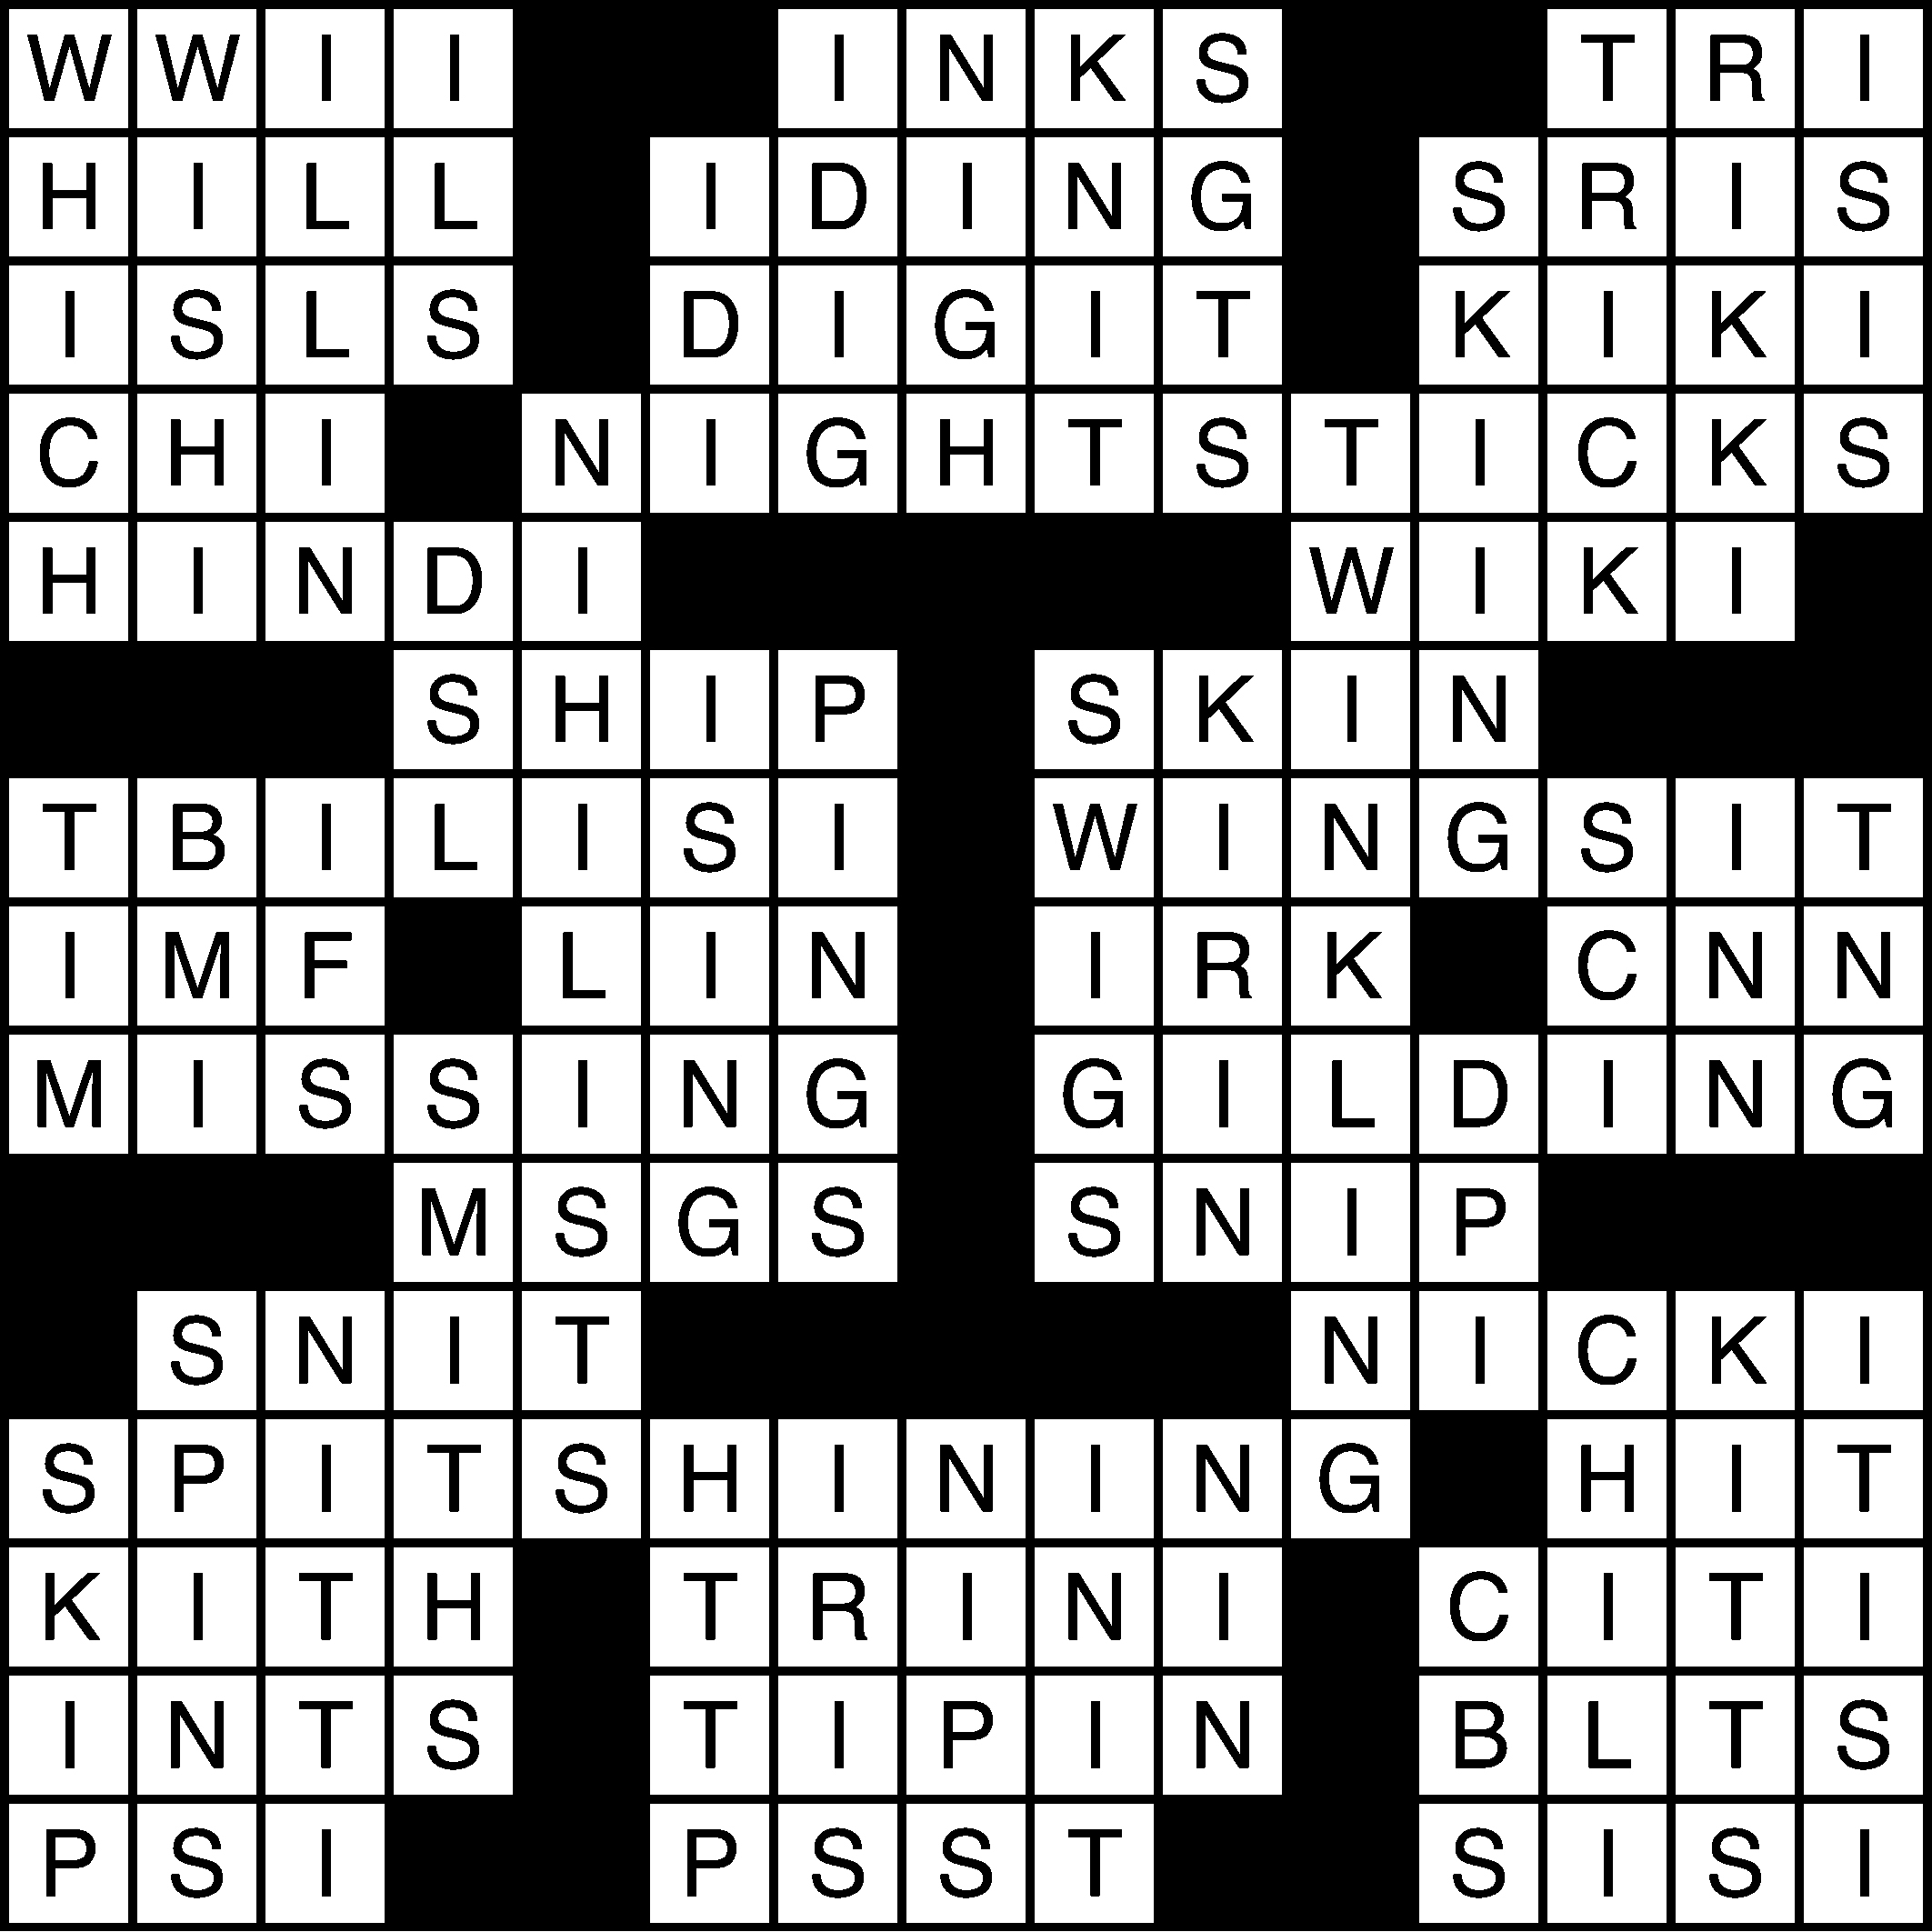 Pass that's scanned crossword